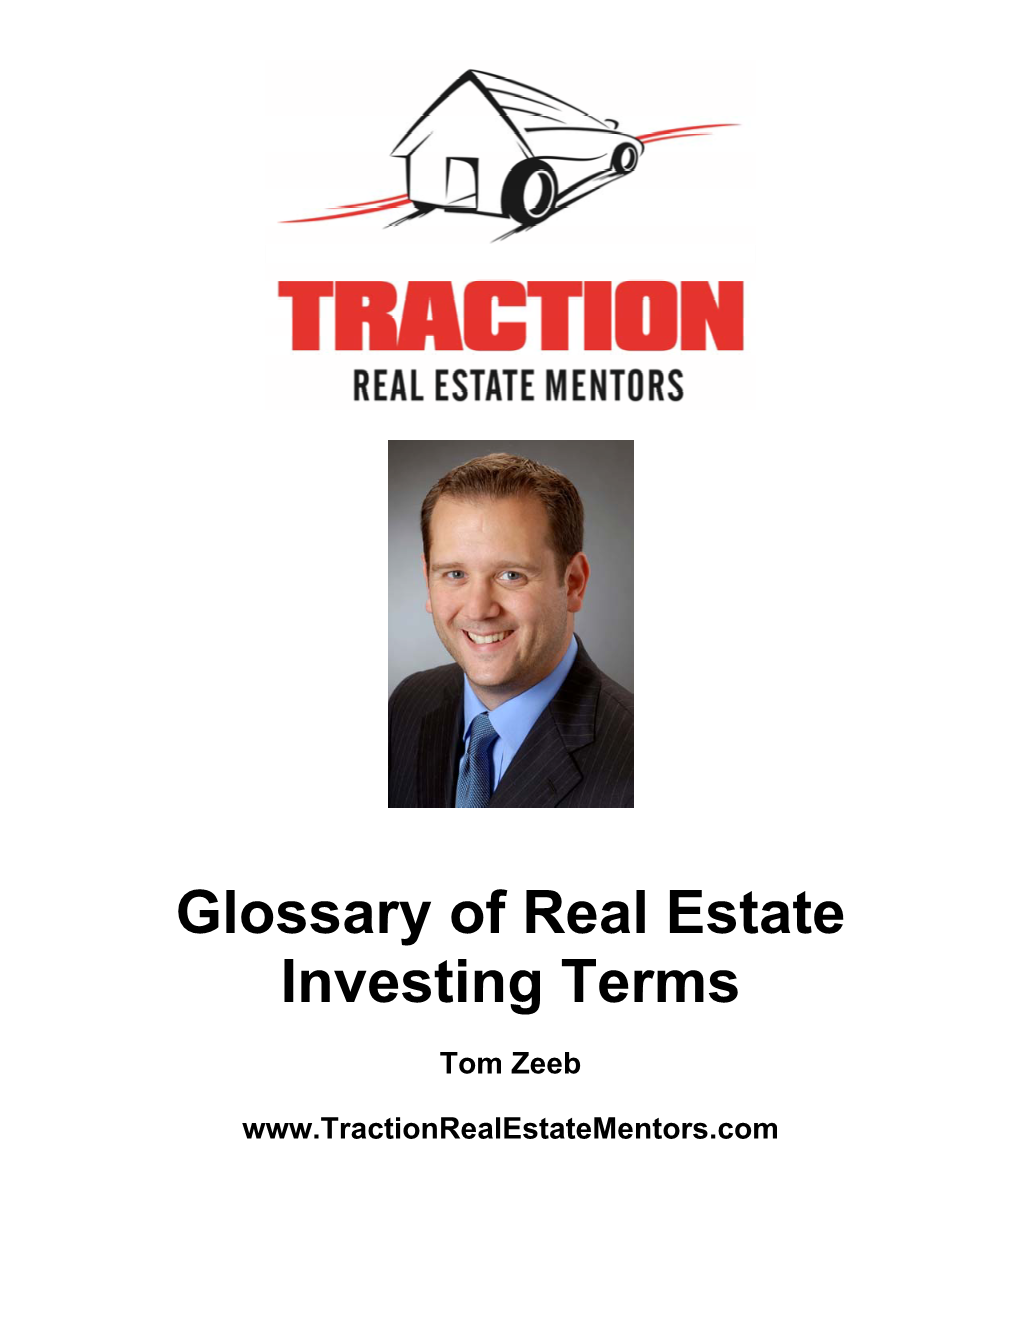 Glossary of Real Estate Investing Terms